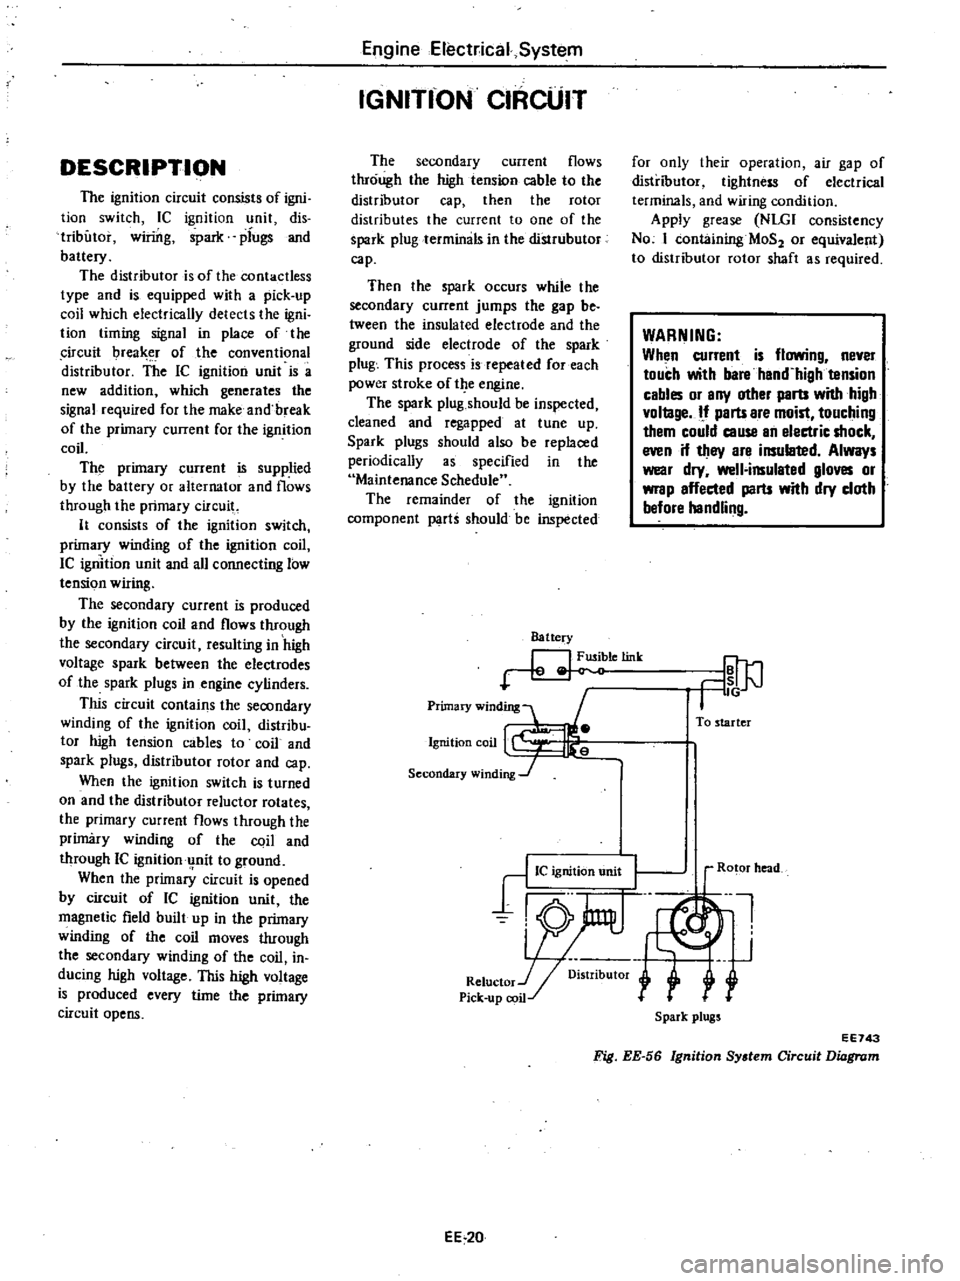 DATSUN 210 1979  Service Manual 
DESCRIPTION

The

ignition 
circuit 
consists

of

igni

tion

switch 
Ie

ignition 
unit 
dis

tributor

winng

ipark 
plugs 
and

battery

The

distributor 
is

of 
the

contactless

type 
and 
is
